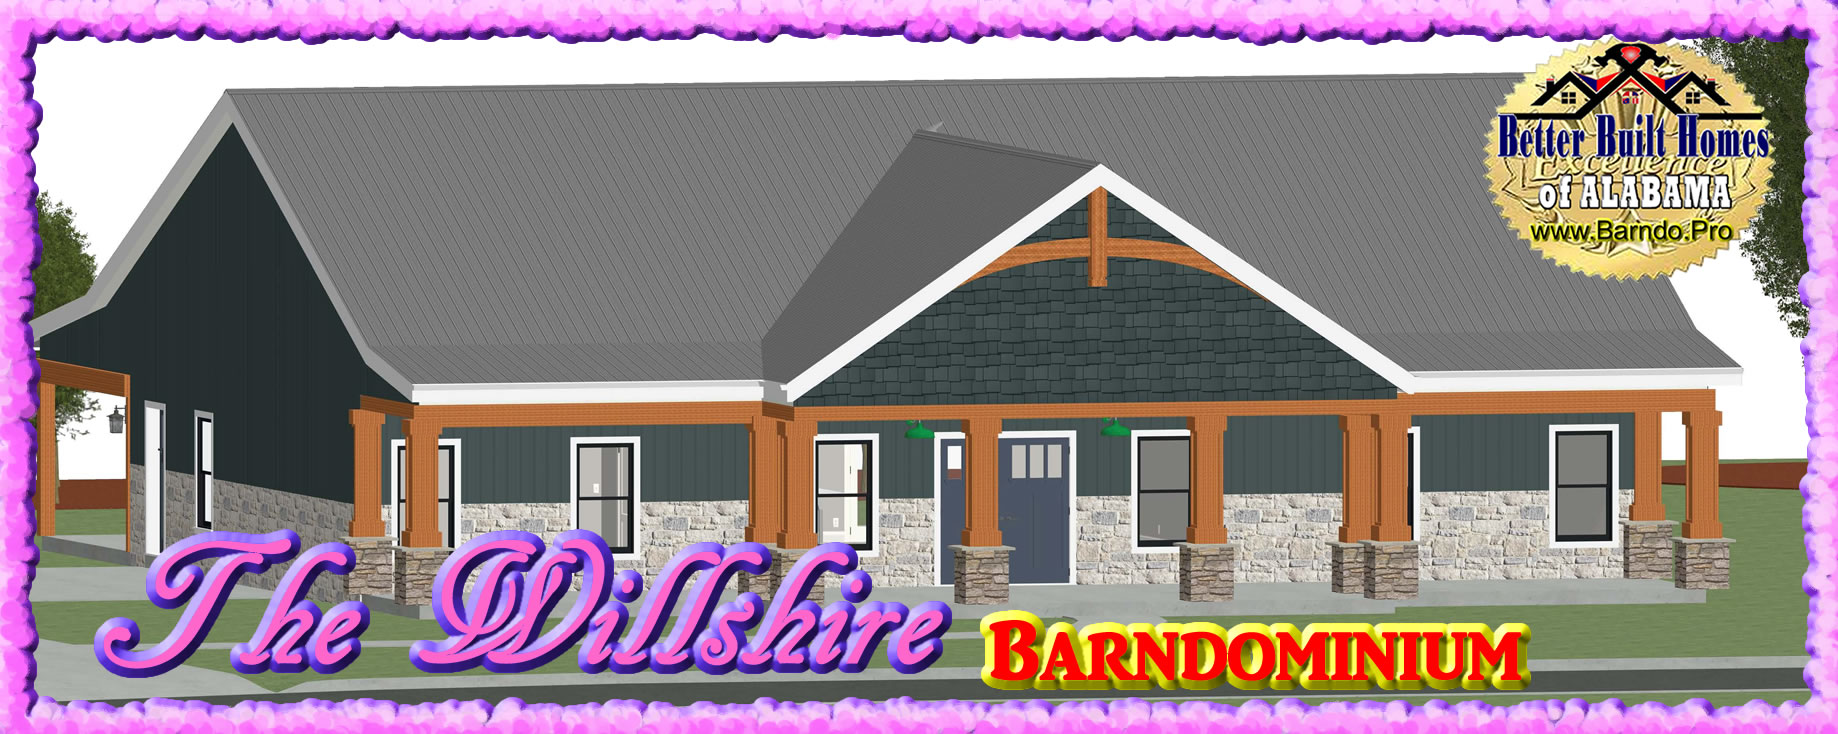 Click to View the Willshire Barndominium Floor Plans and Barndo Features.